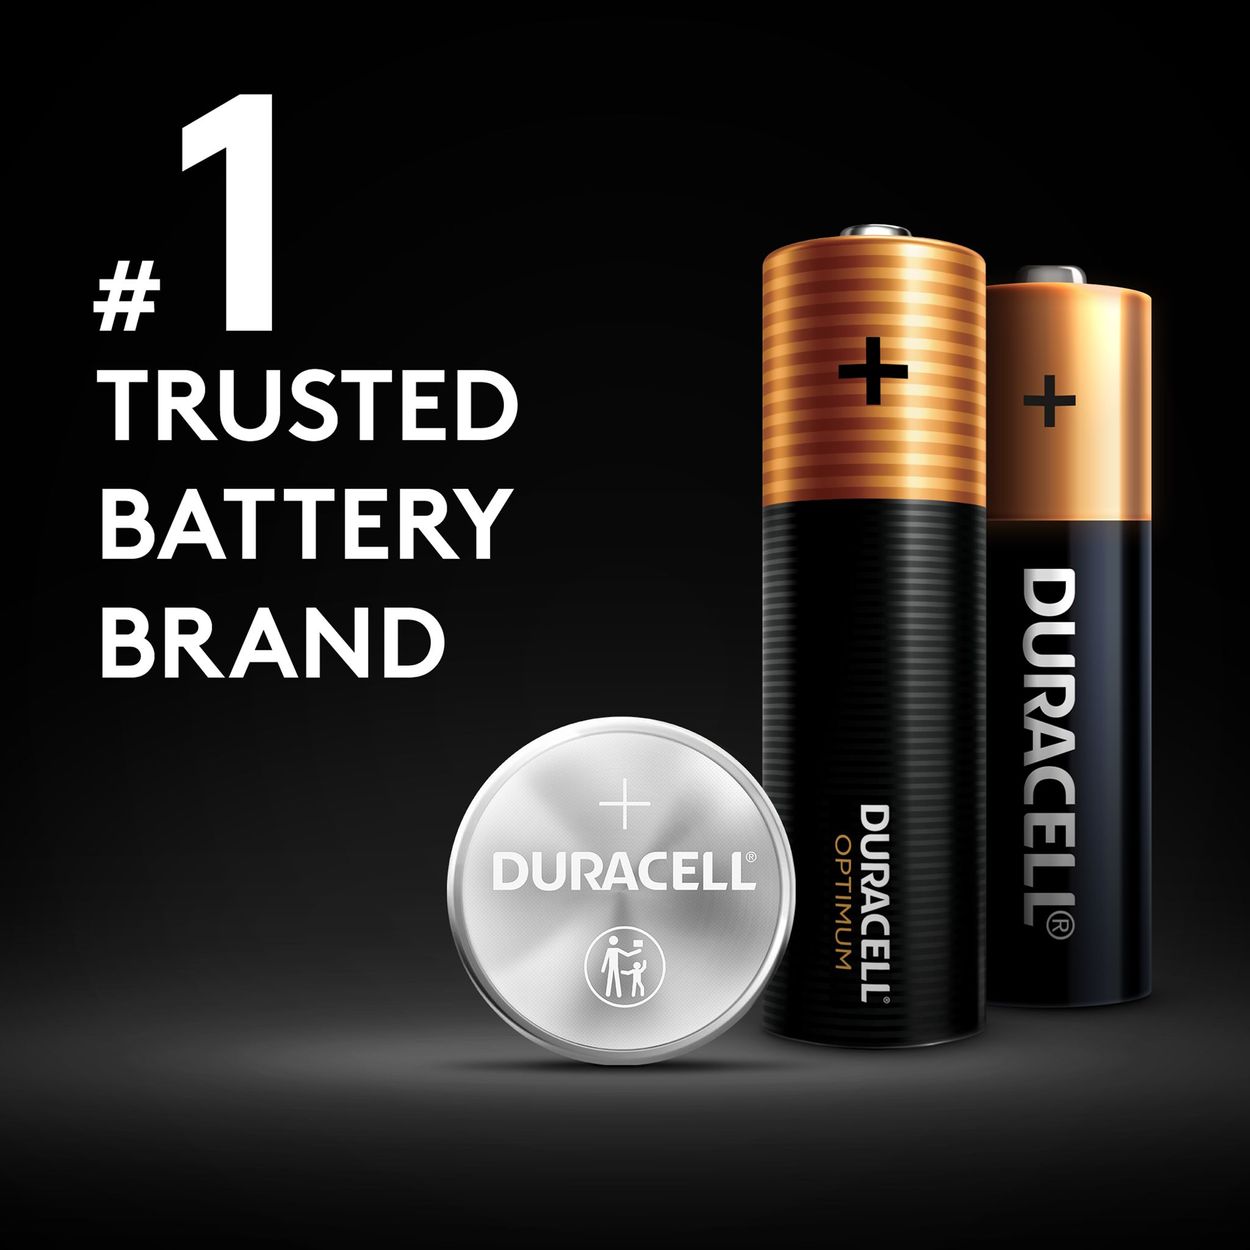 #1 Trusted Battery Brand